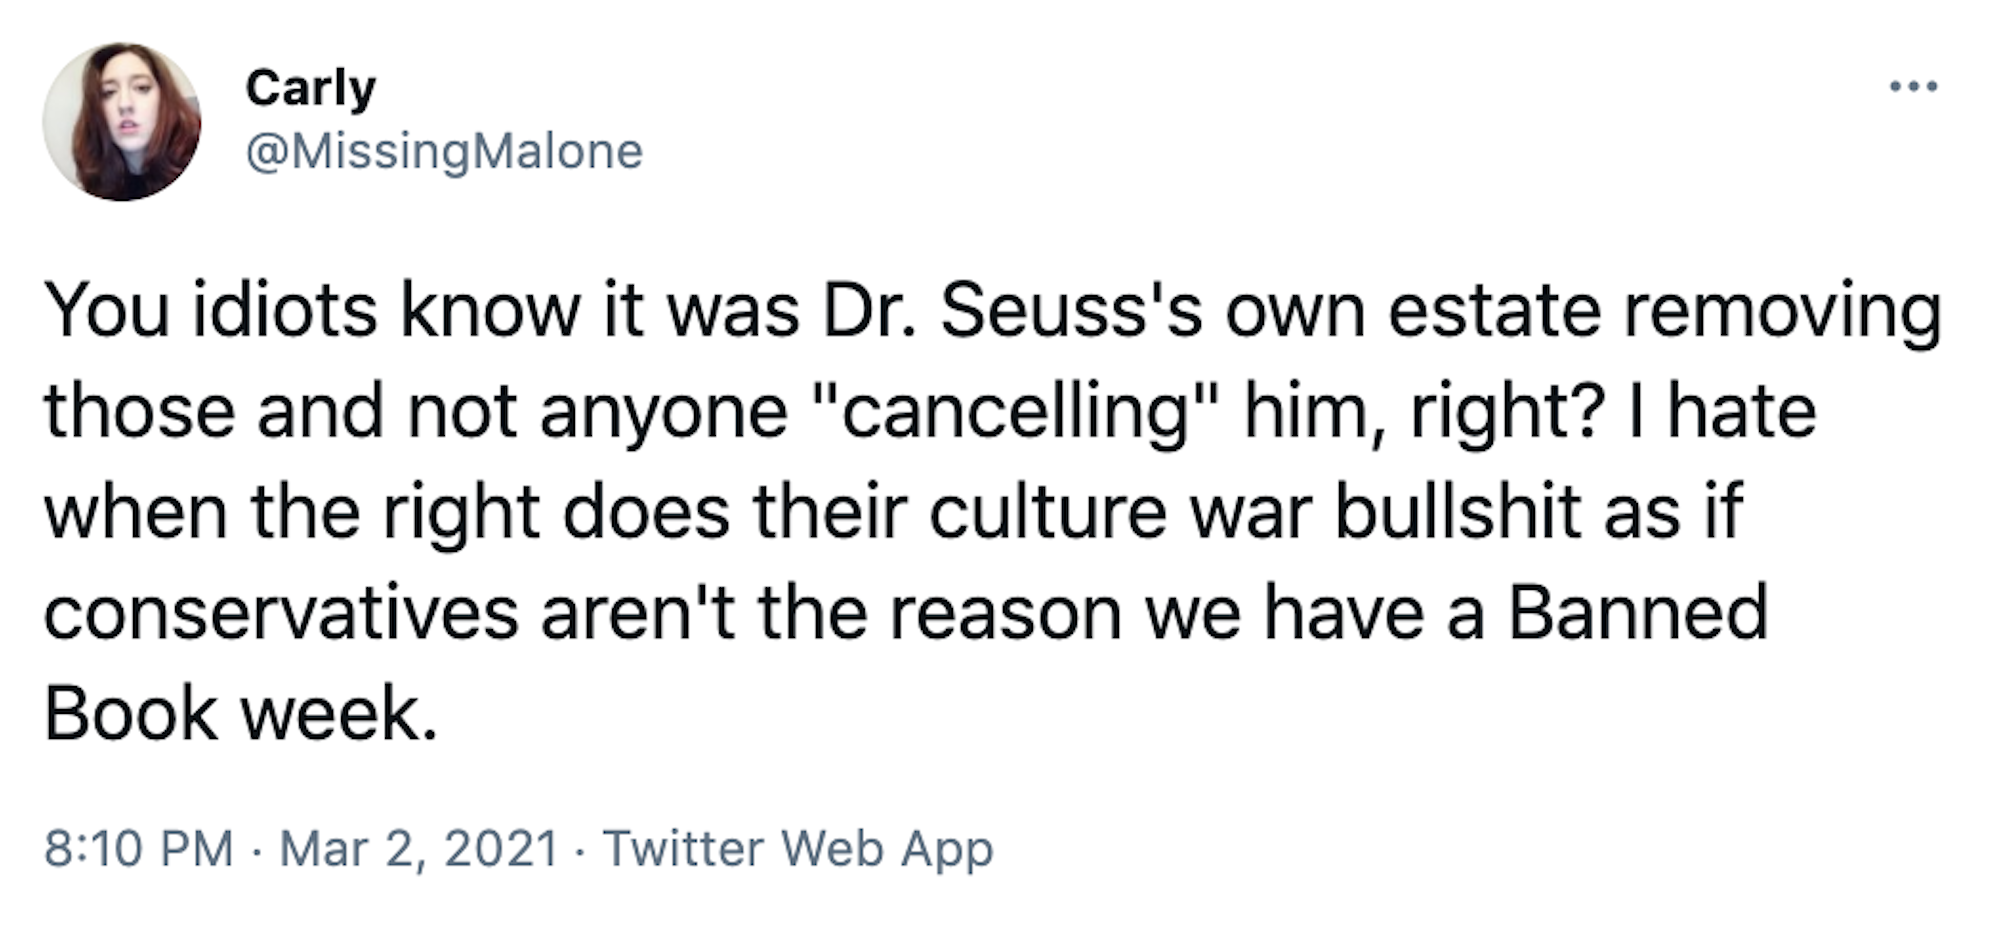 You idiots know it was Dr. Seuss's own estate removing those and not anyone "cancelling" him, right? I hate when the right does their culture war bullshit as if conservatives aren't the reason we have a Banned Book week.